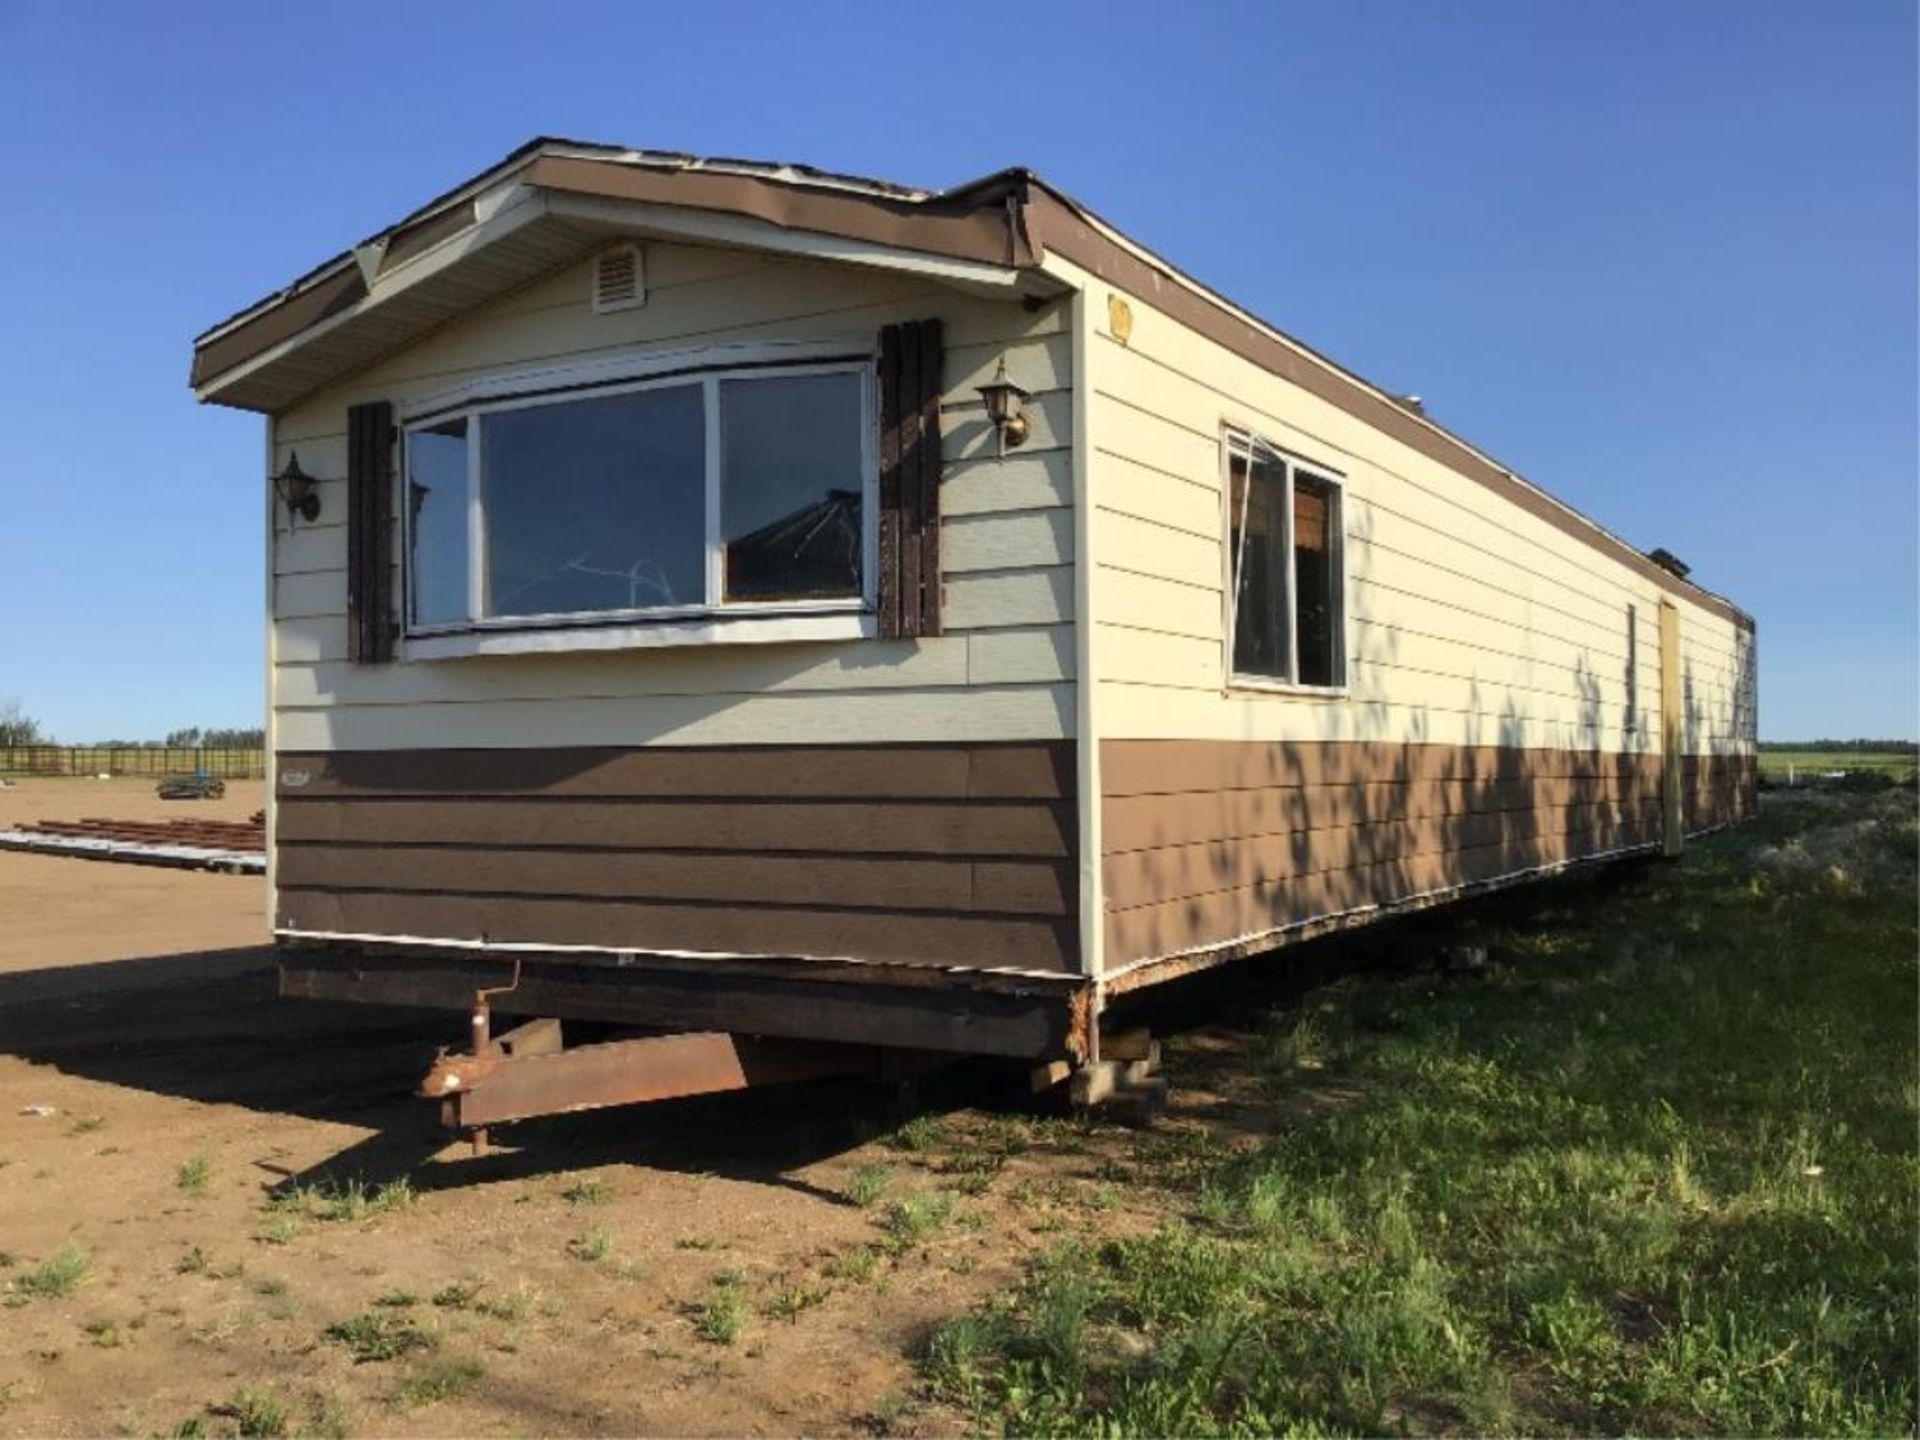 14ft x 68ft 2-Bedroom Mobile Home Kitchen Front, Fireplace in Living Room, Master Ensuite, Ext Tin - Image 2 of 22